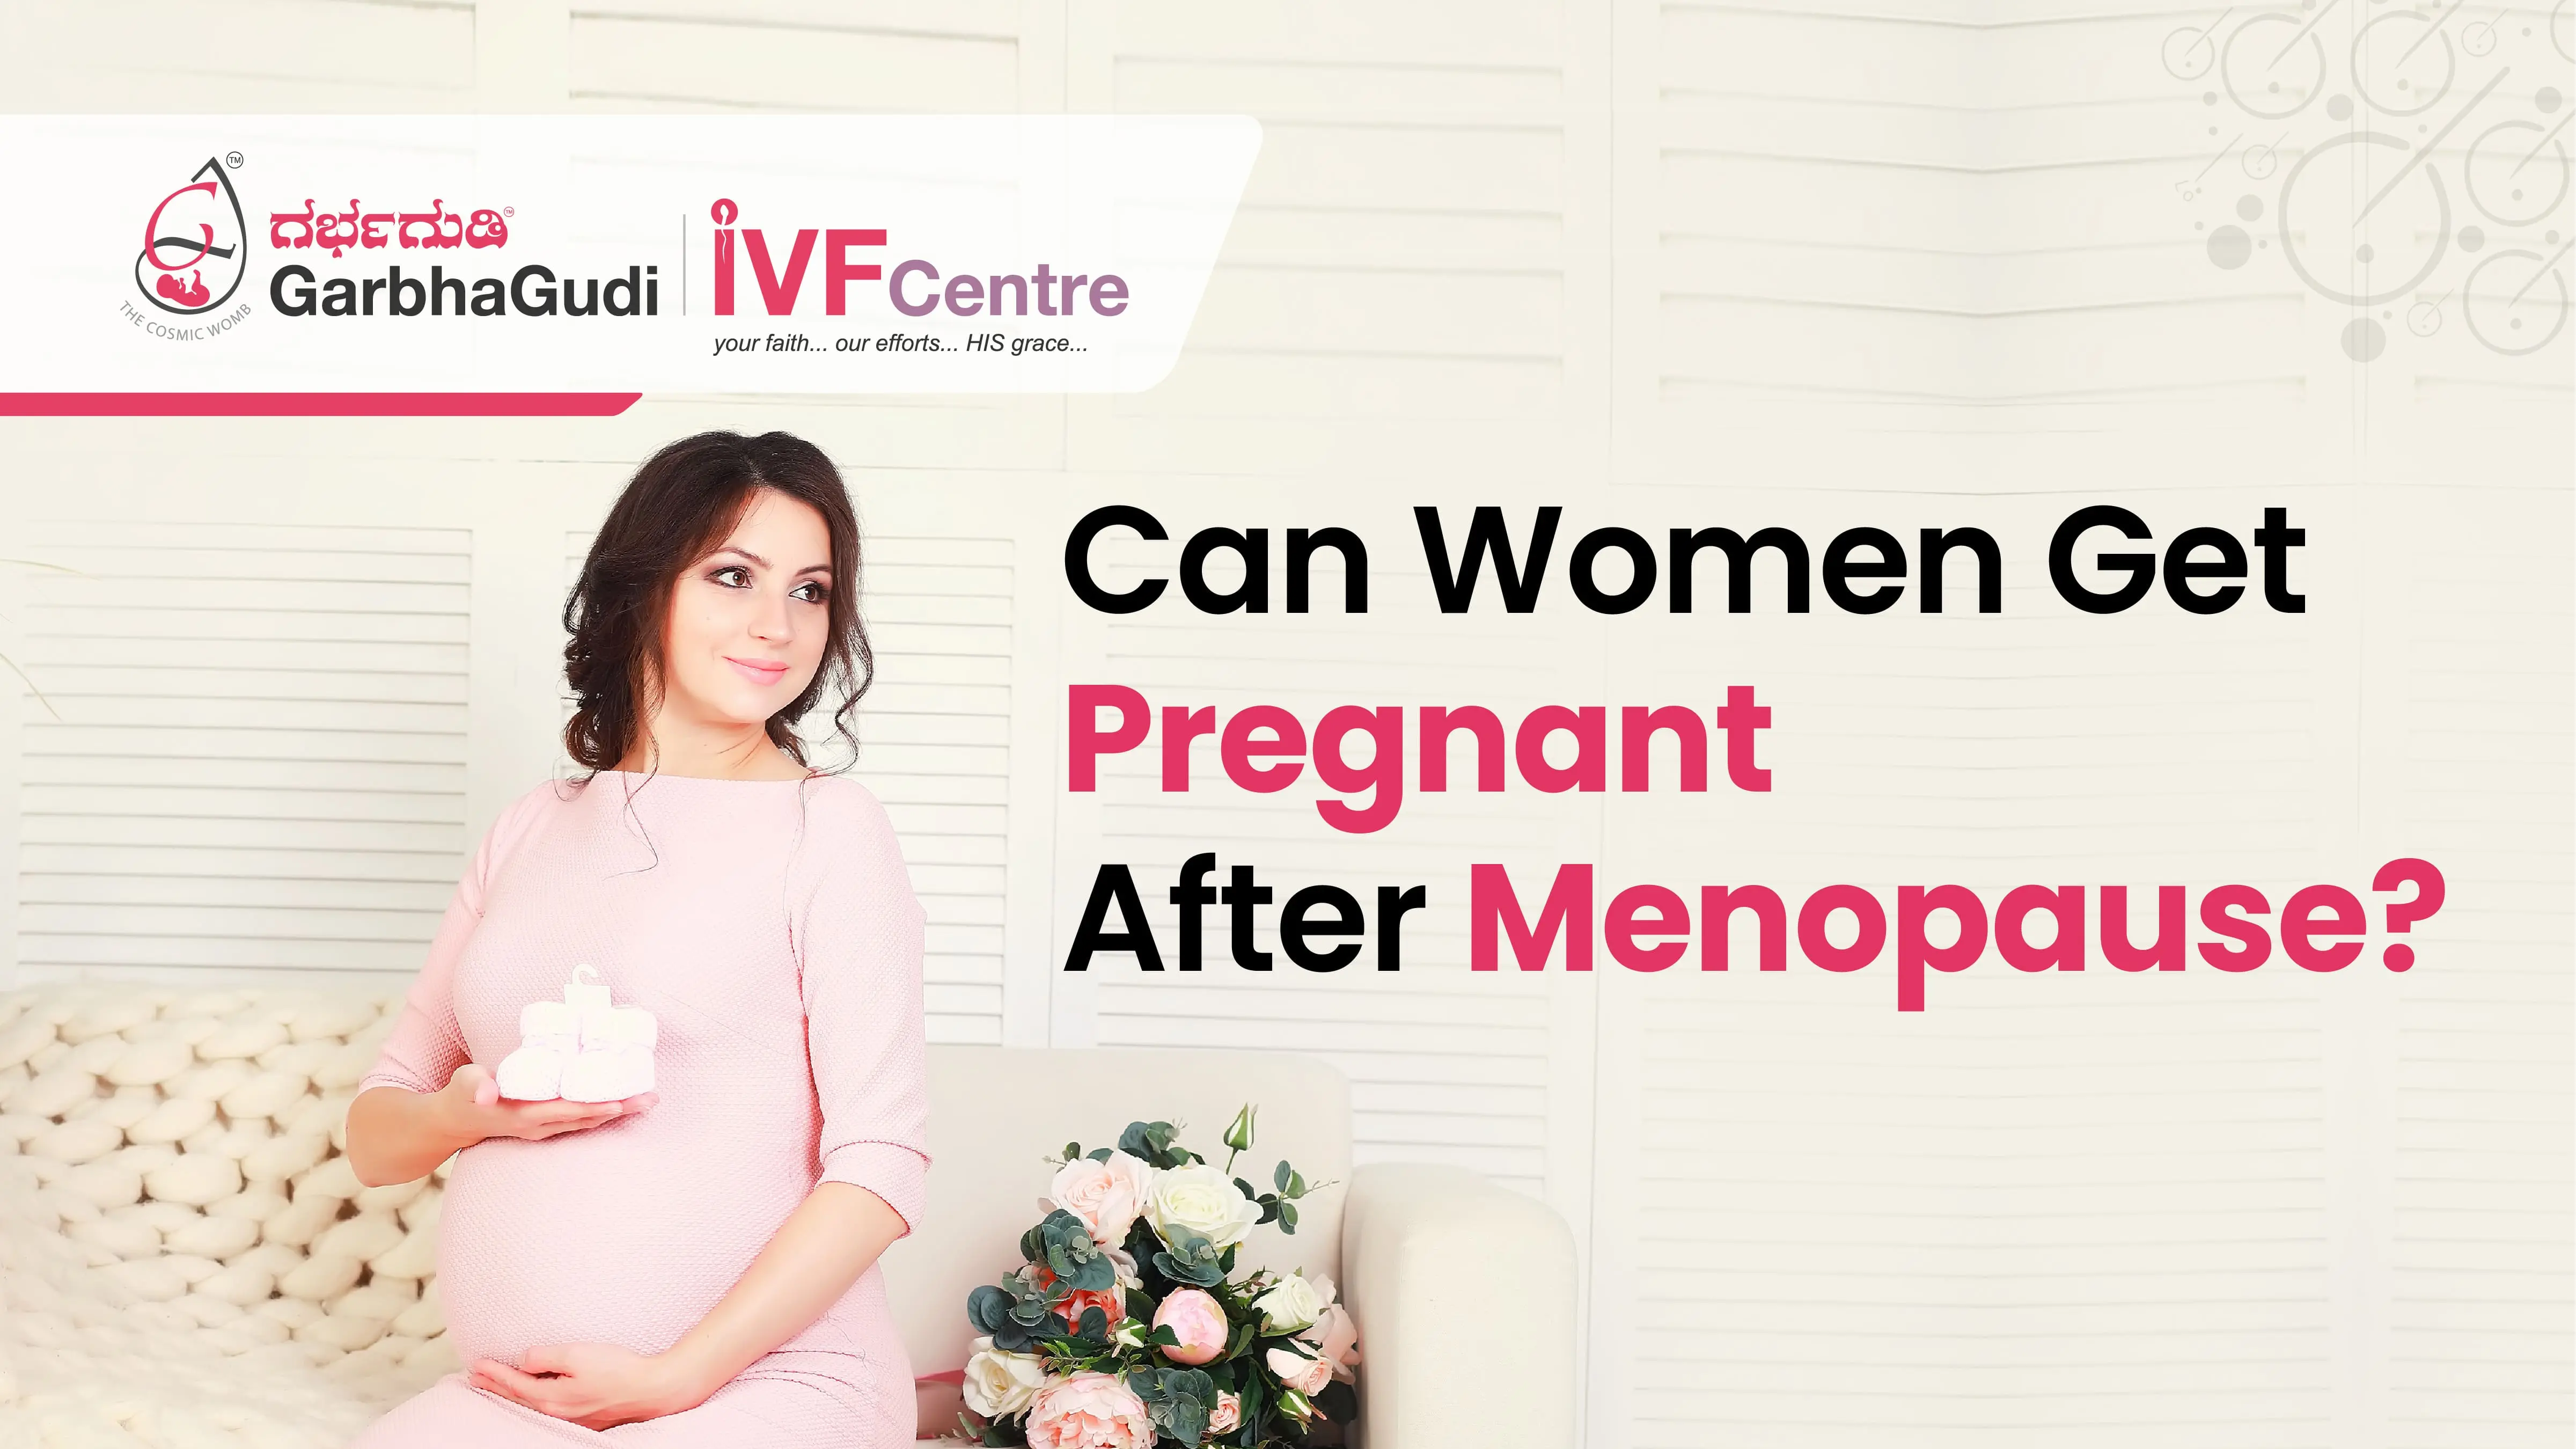 Can Women Get Pregnant After Menopause?